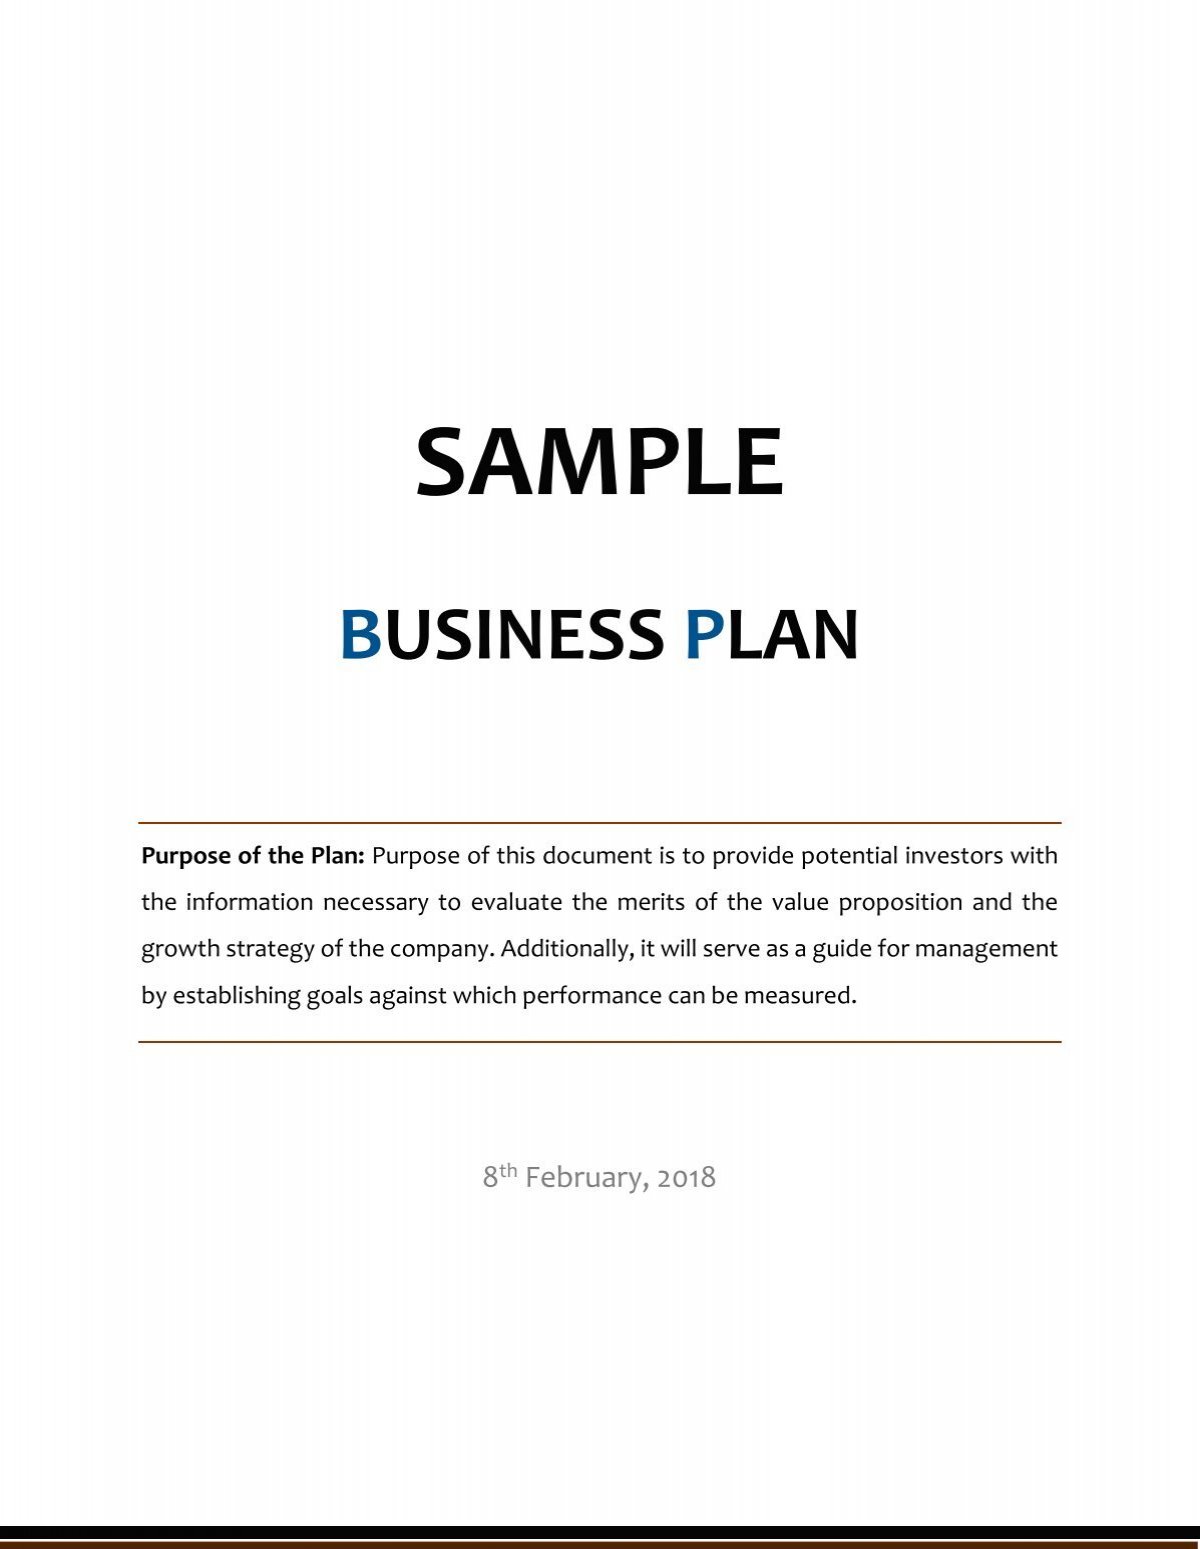 How to write a business plan for a cigarette manufacturer?